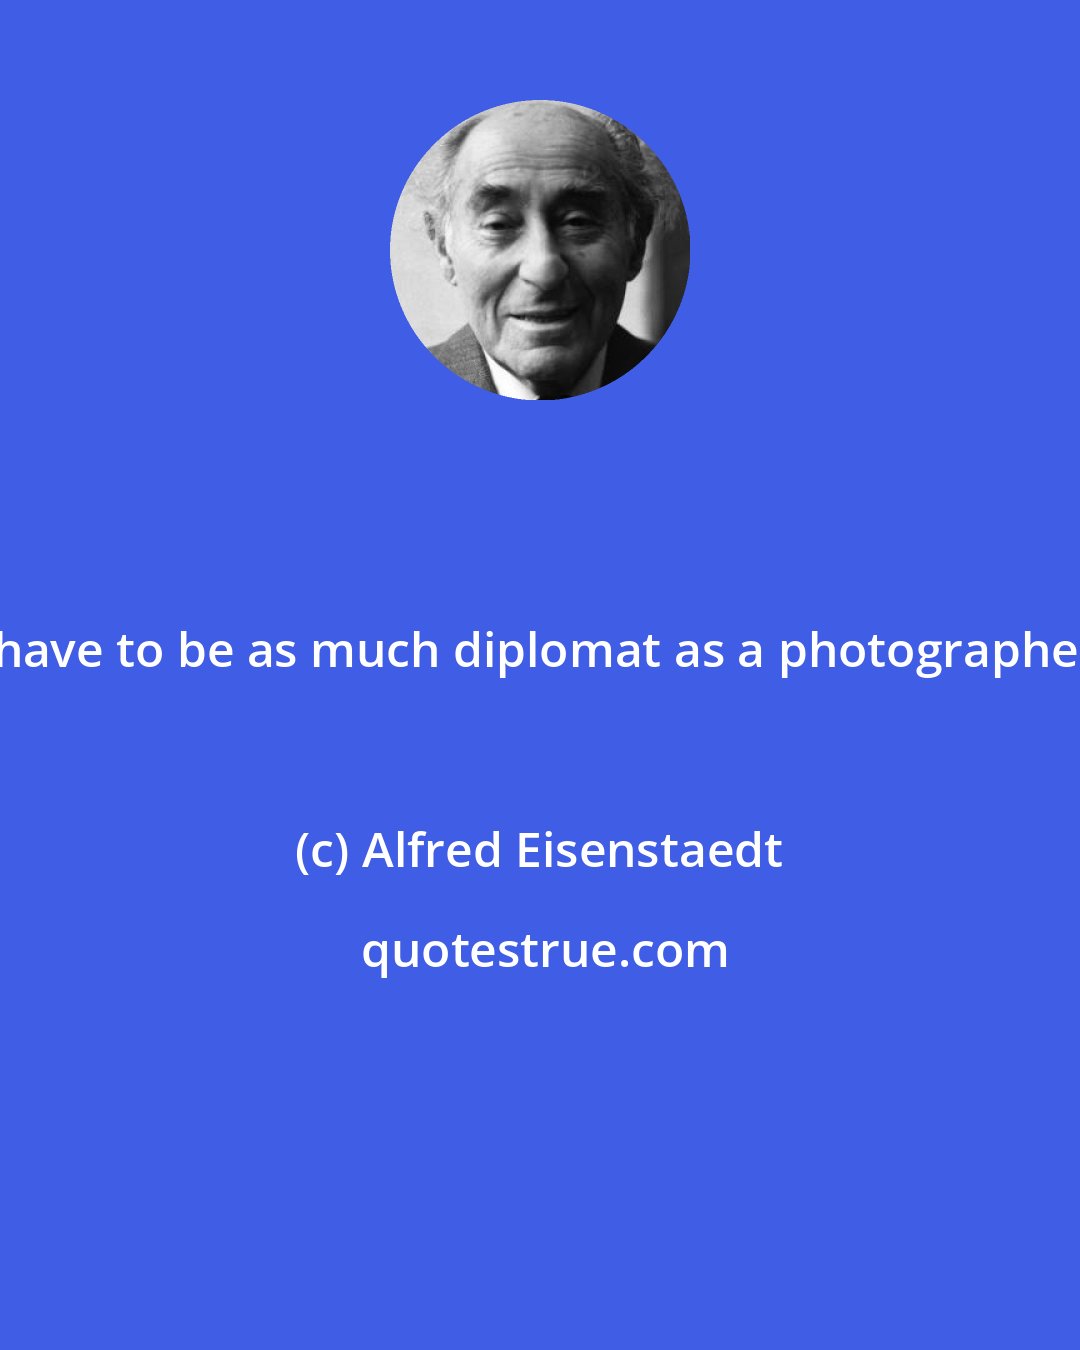 Alfred Eisenstaedt: I have to be as much diplomat as a photographer.